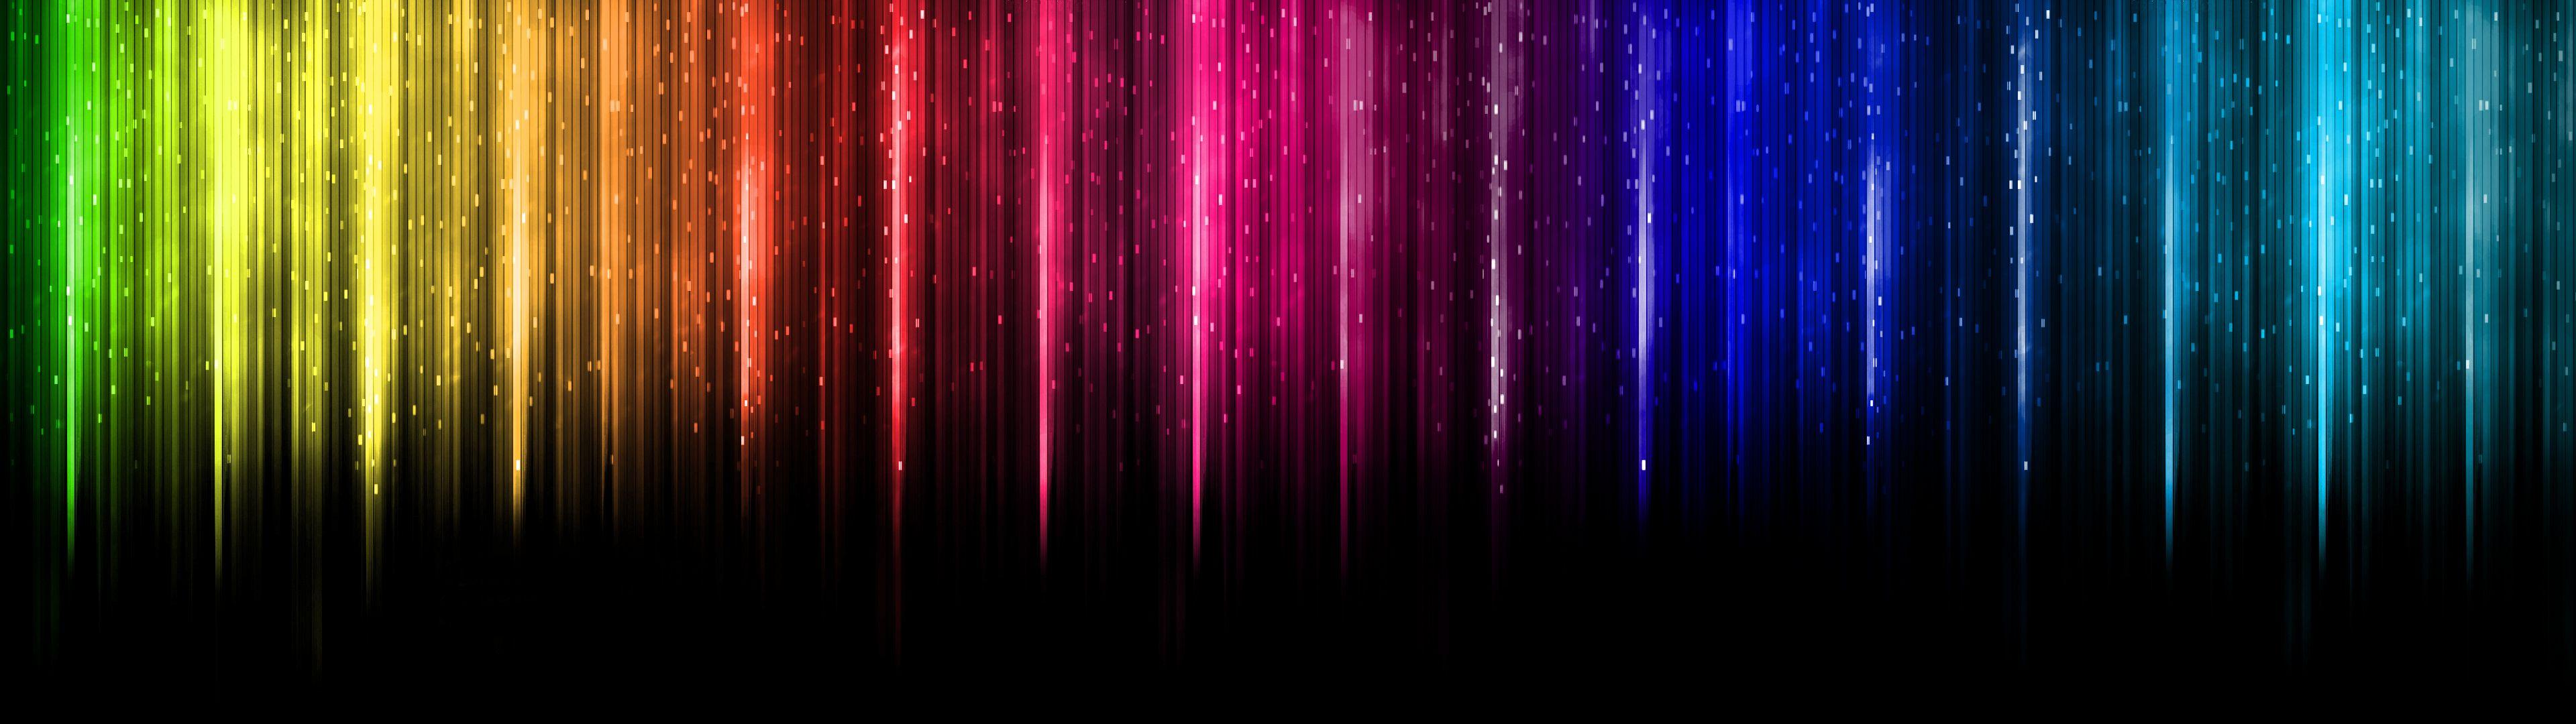 Abstract Dual Screen Wallpapers - Top Free Abstract Dual Screen